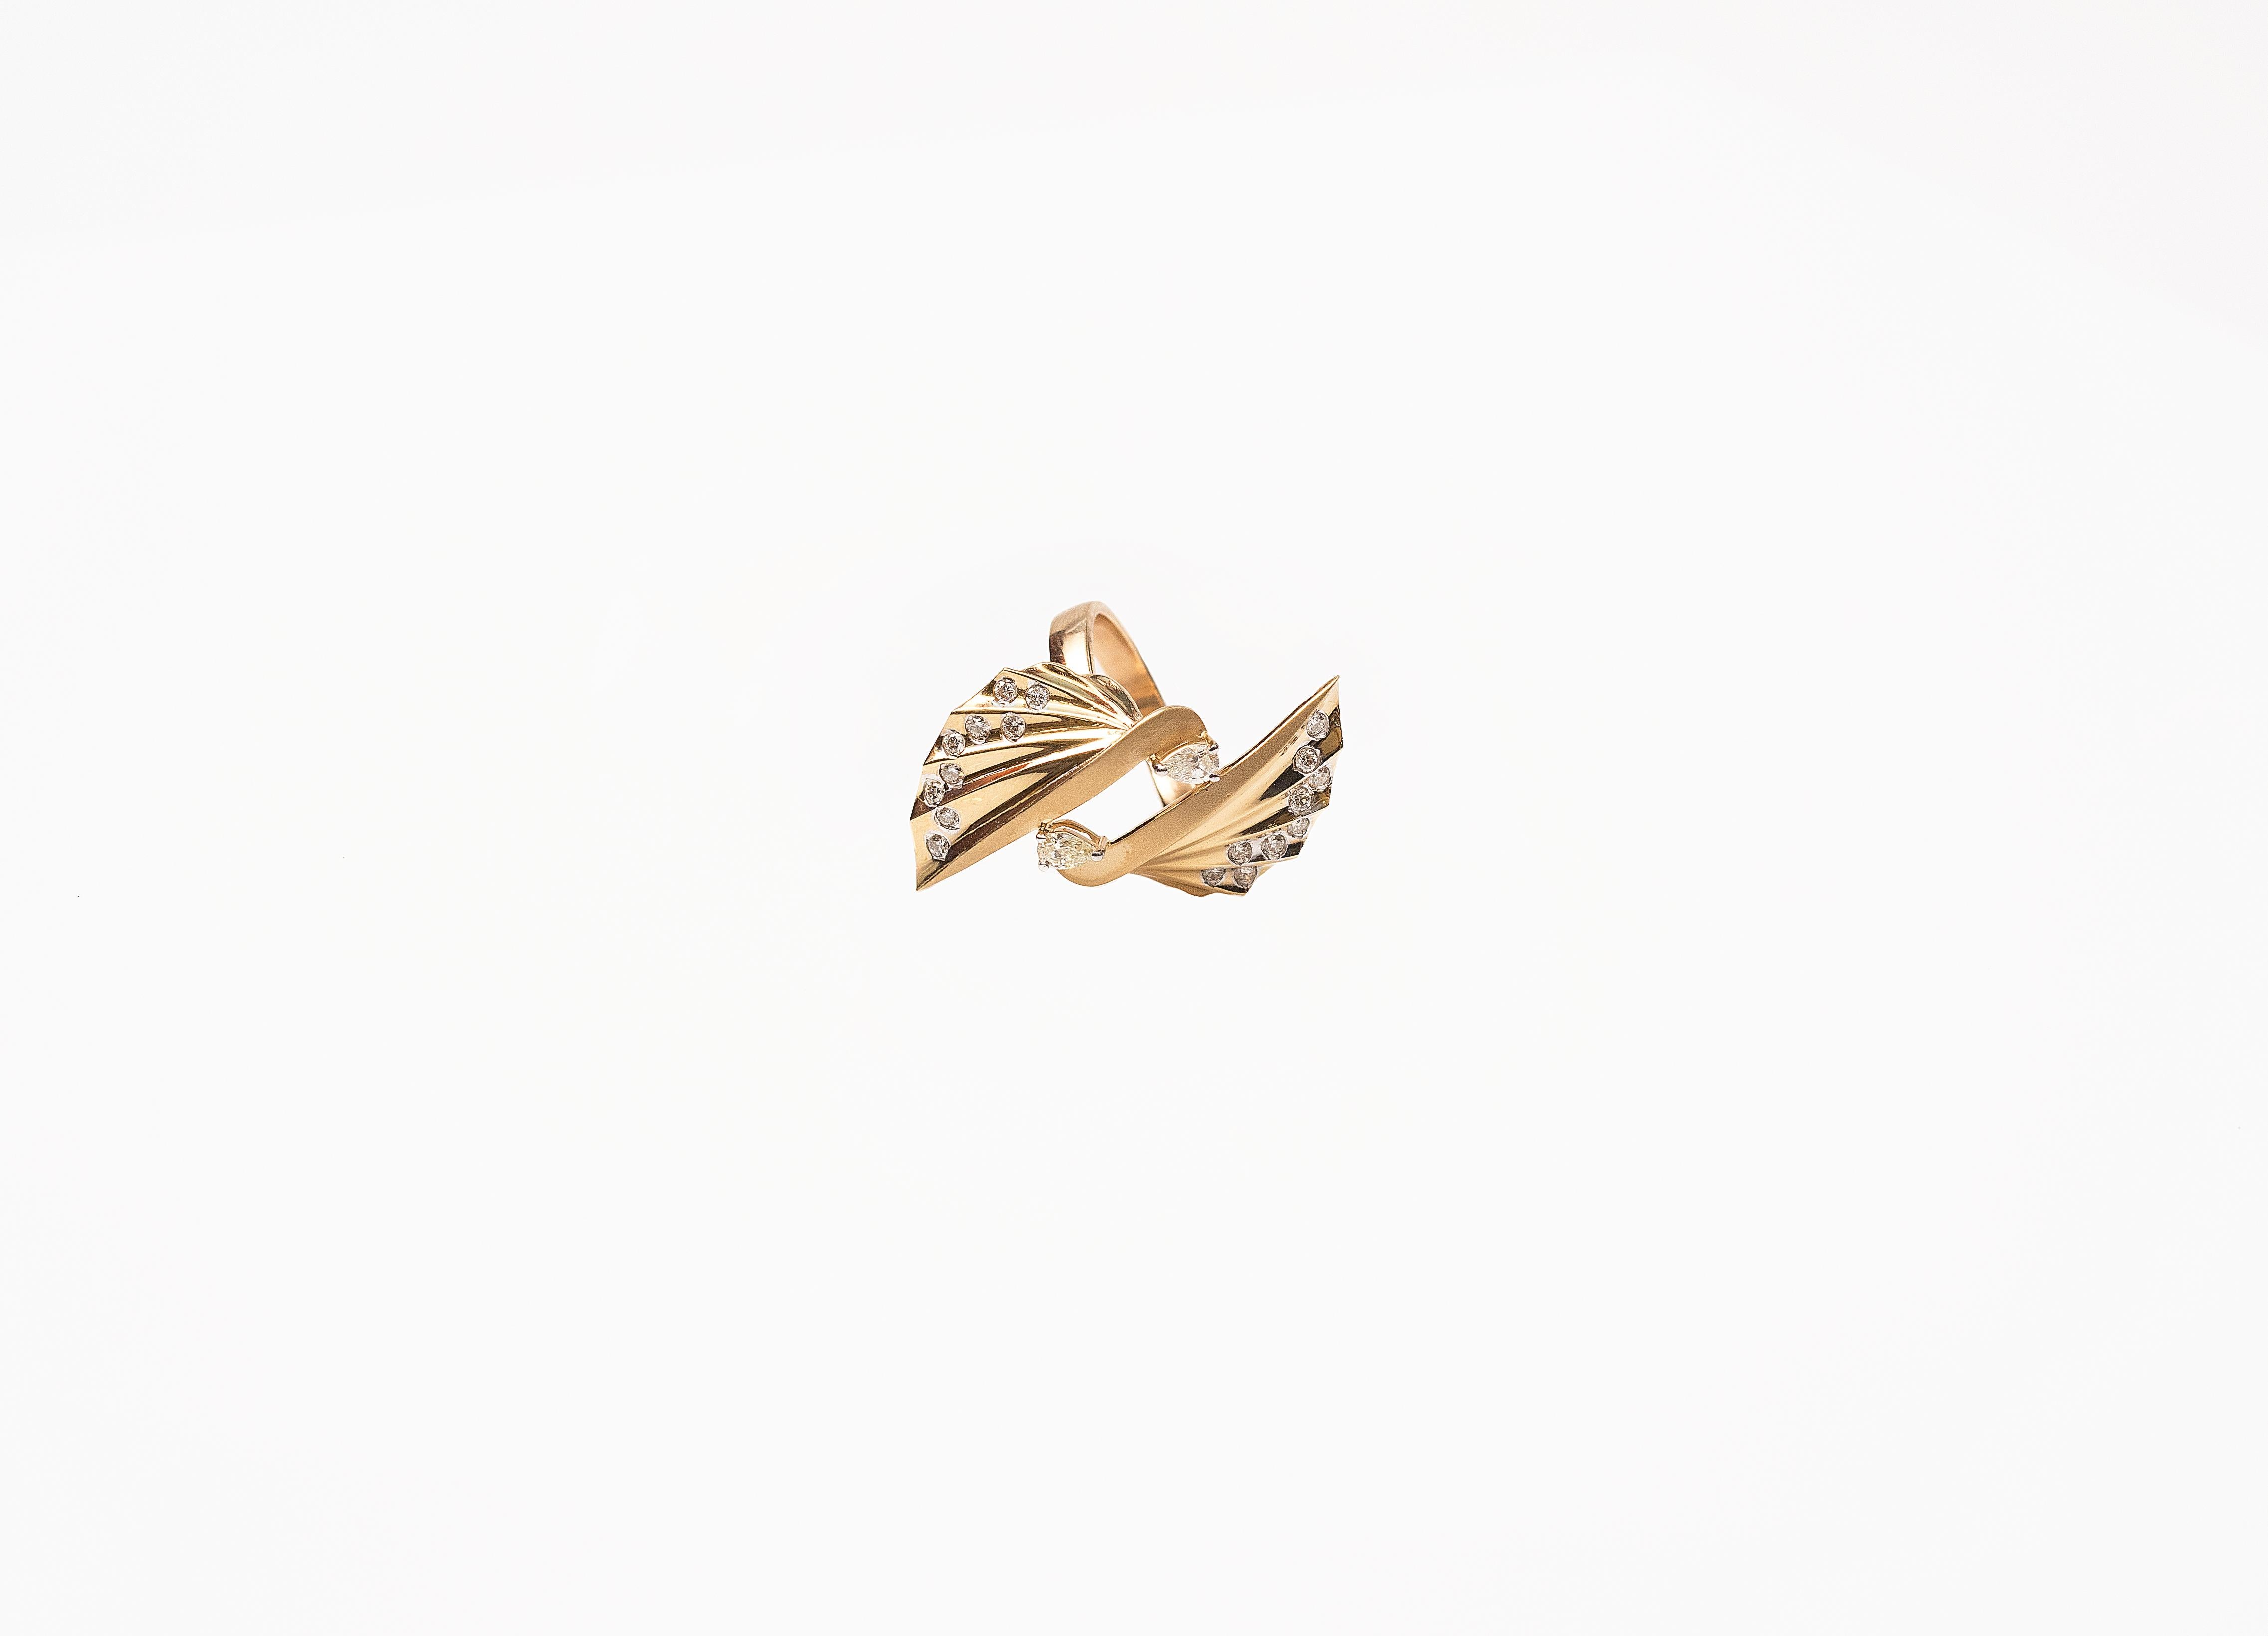 Handcrafted Cocktail ring in 18K Yellow Gold Studded with Pear & round Diamonds.
Inspired by Japanese Paper Art 